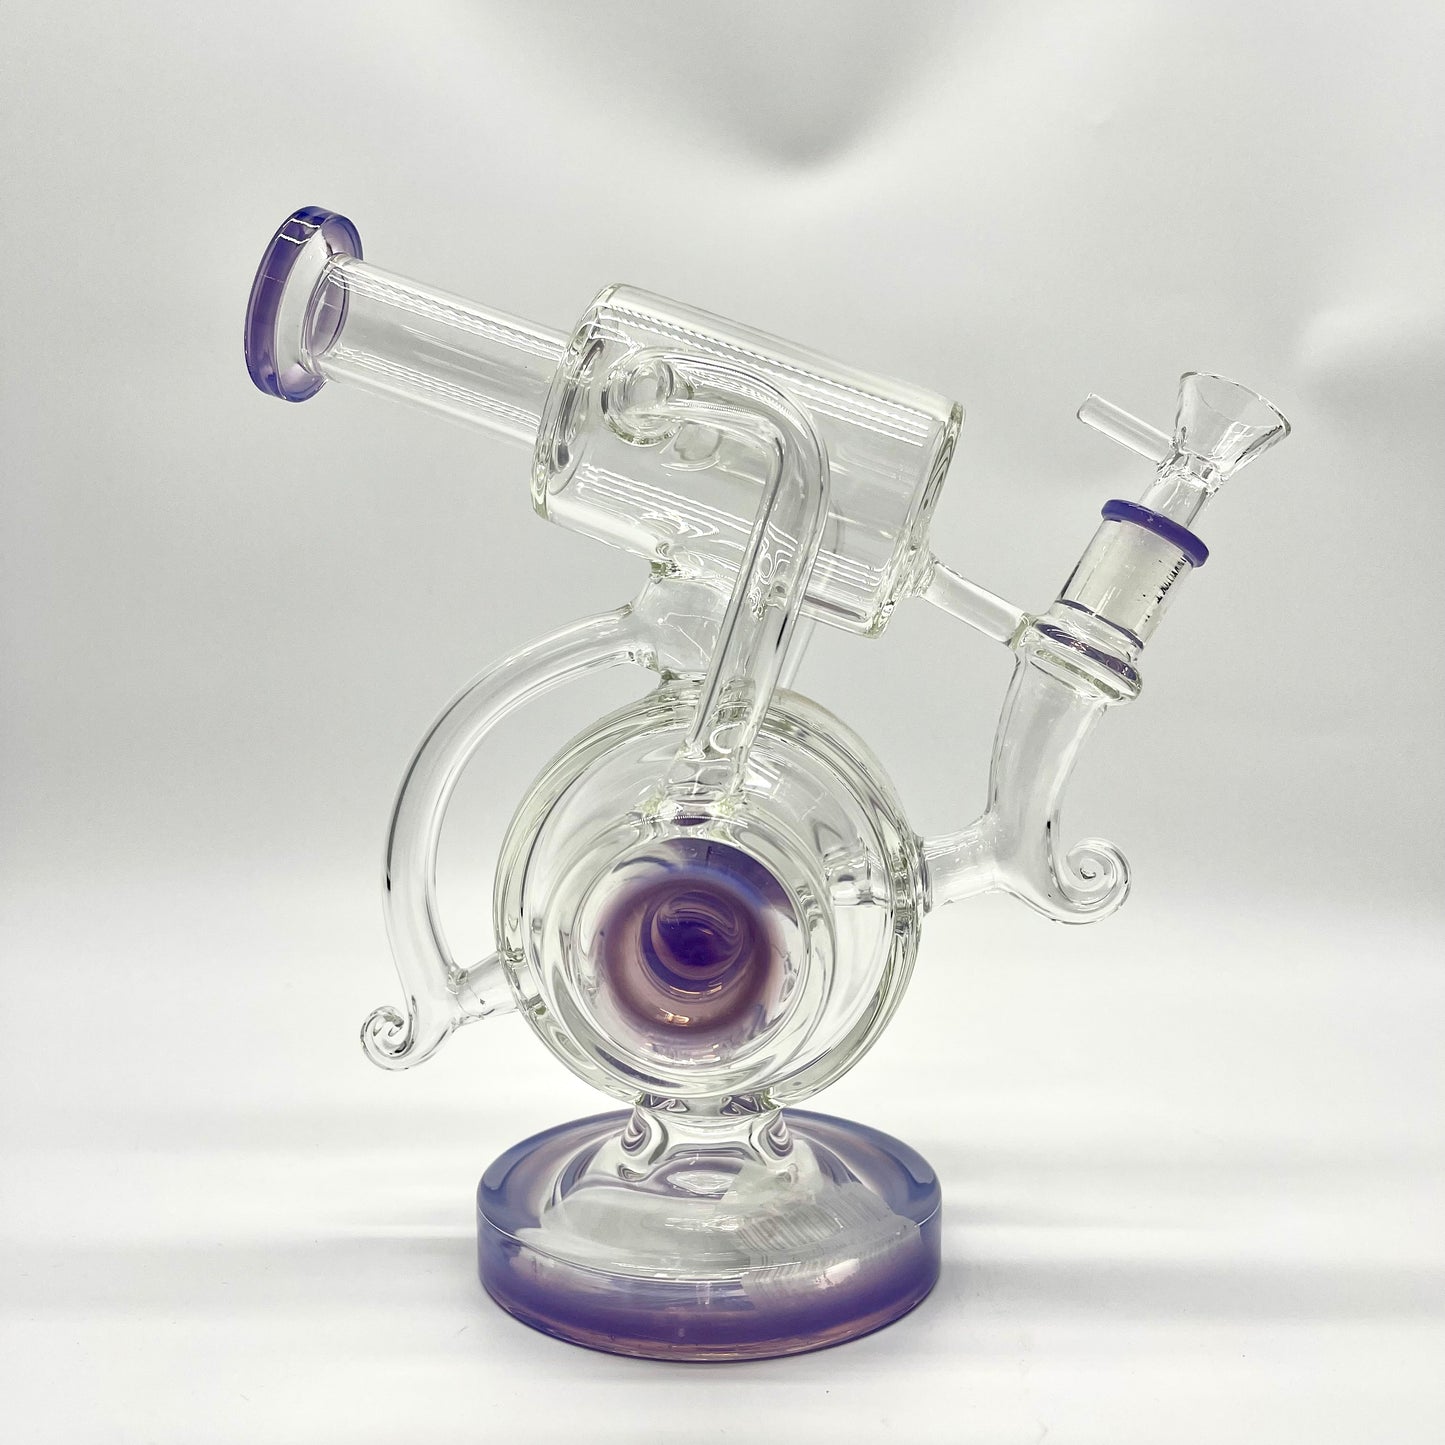 Weedo Medium Glass BongsWeedo Medium Glass Bongs (23cm)(Special Edition Only 1 In Stock)